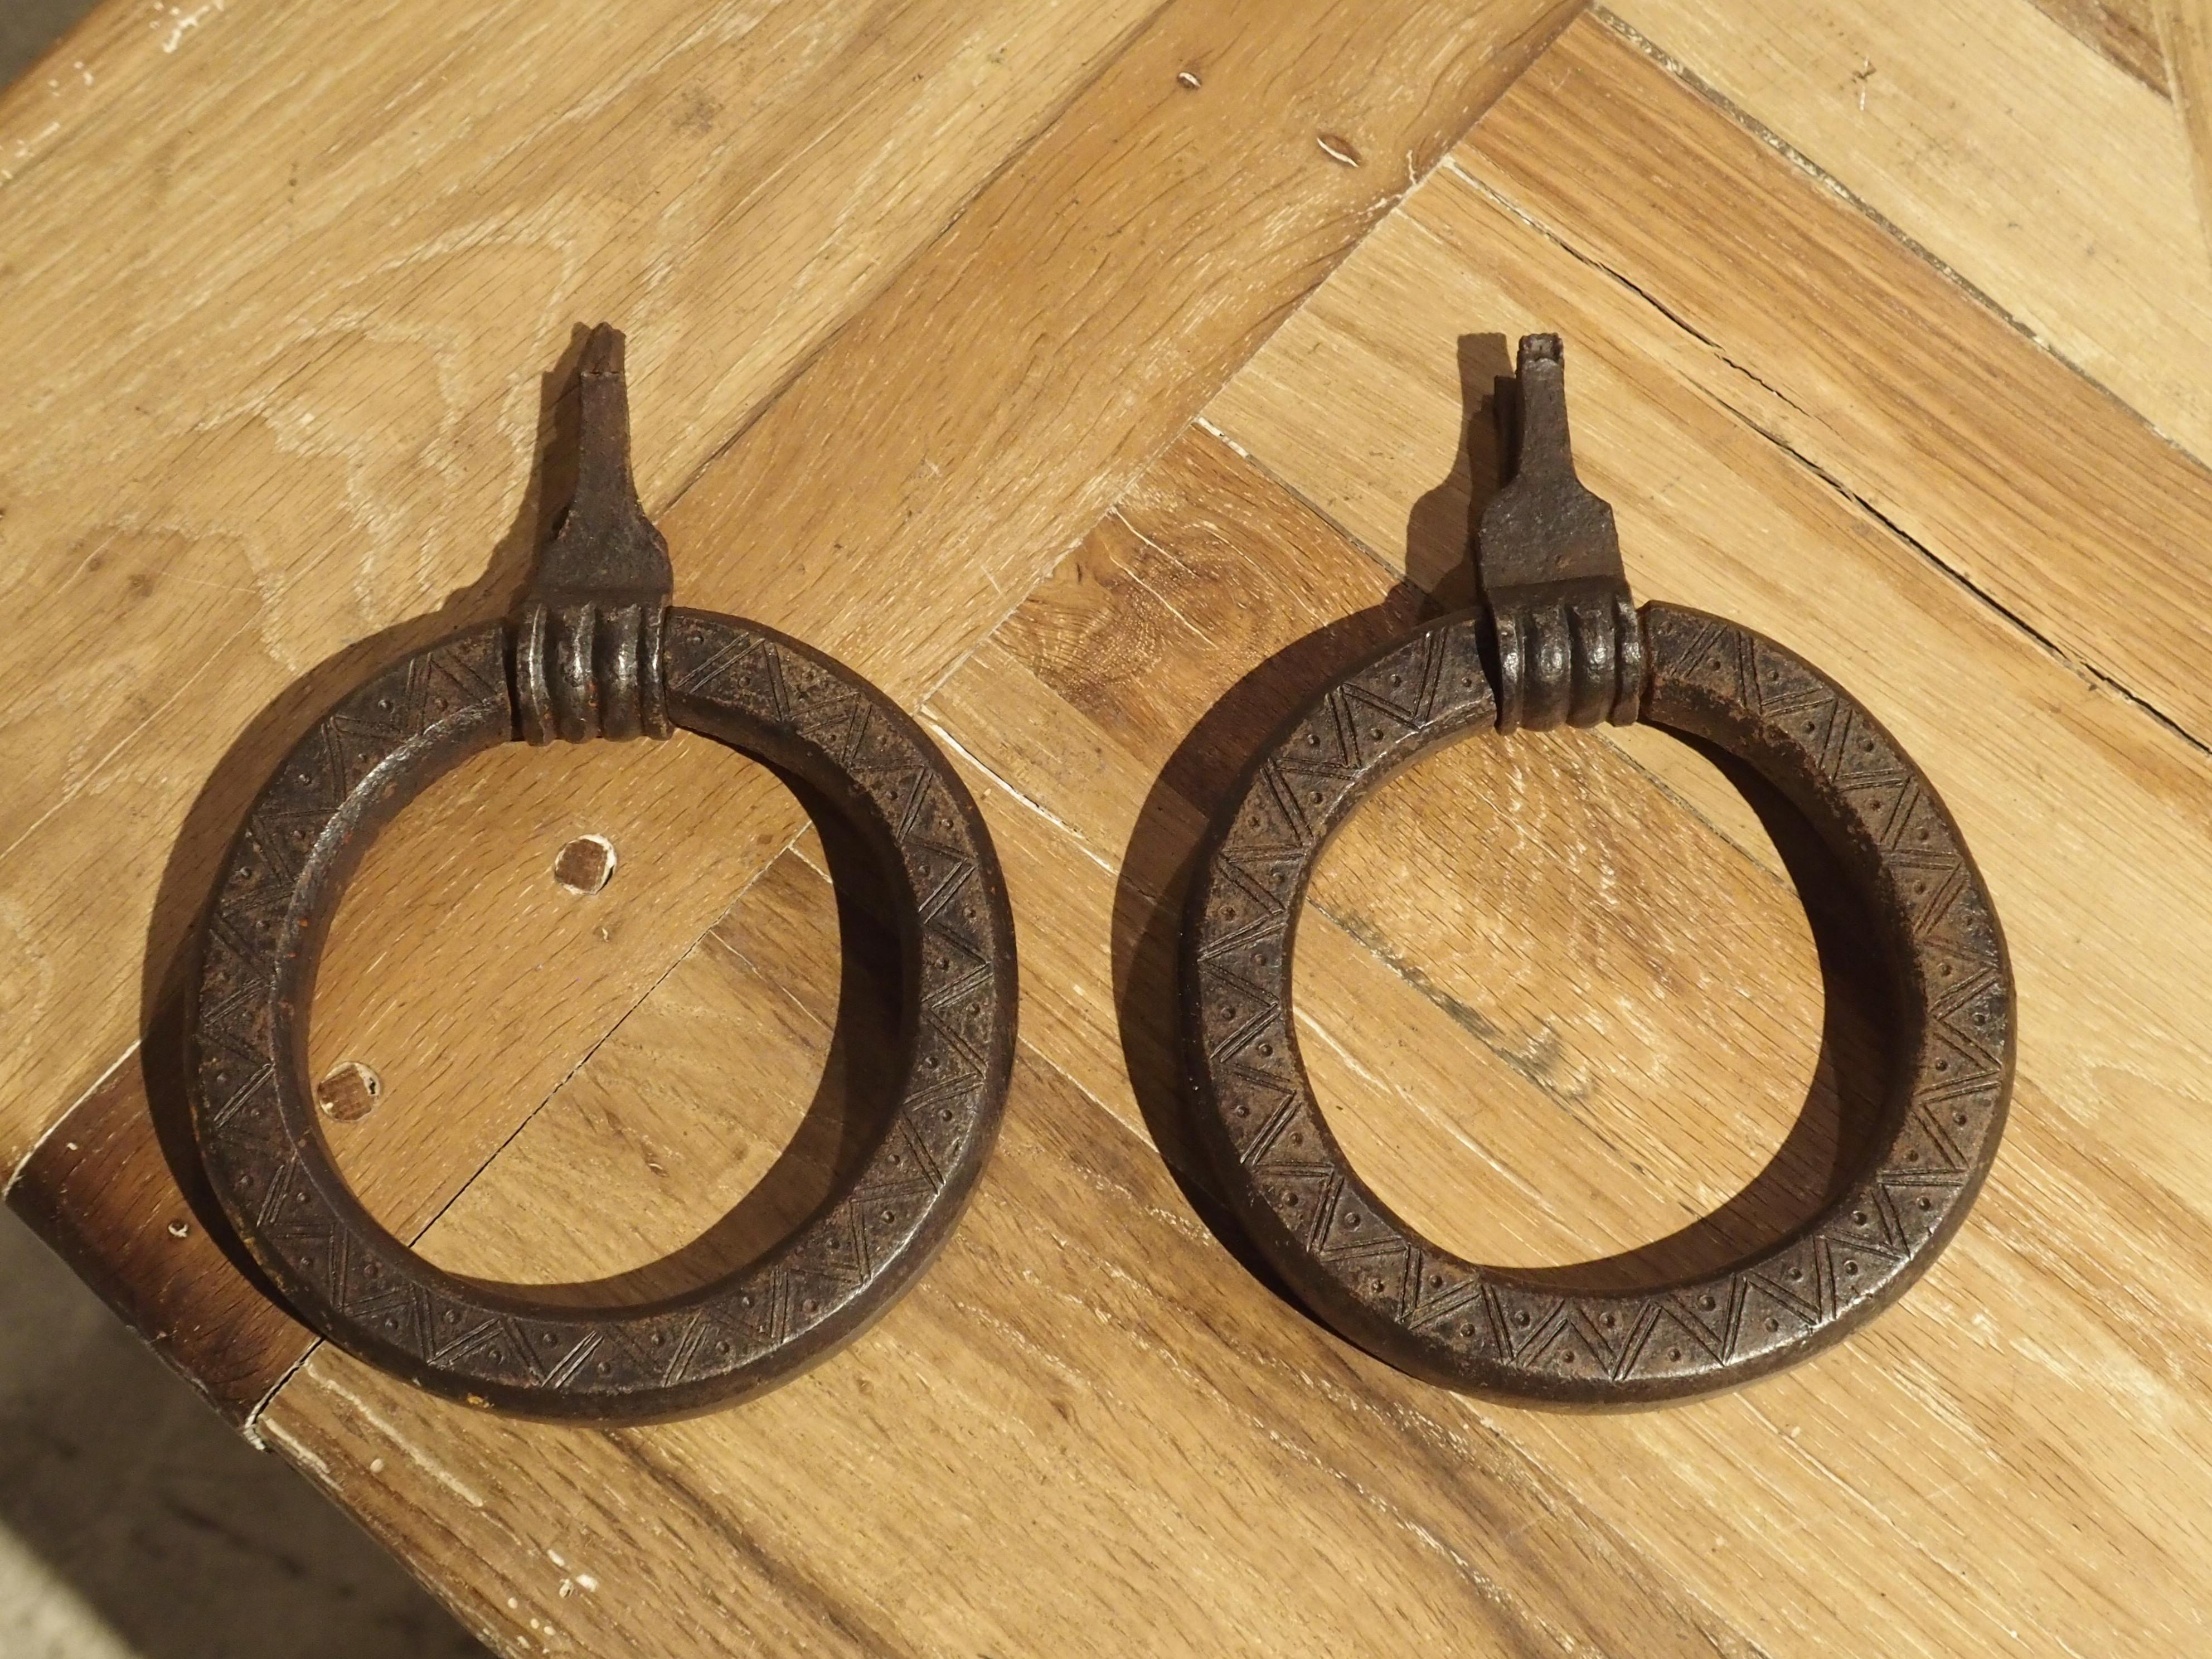 This pair of hand forged door knockers may have been salvaged from a pair of exterior doors in the North of Italy. The simple iron ring knocker can often be seen on old farm doors throughout Tuscany. However, it’s also possible that these were horse